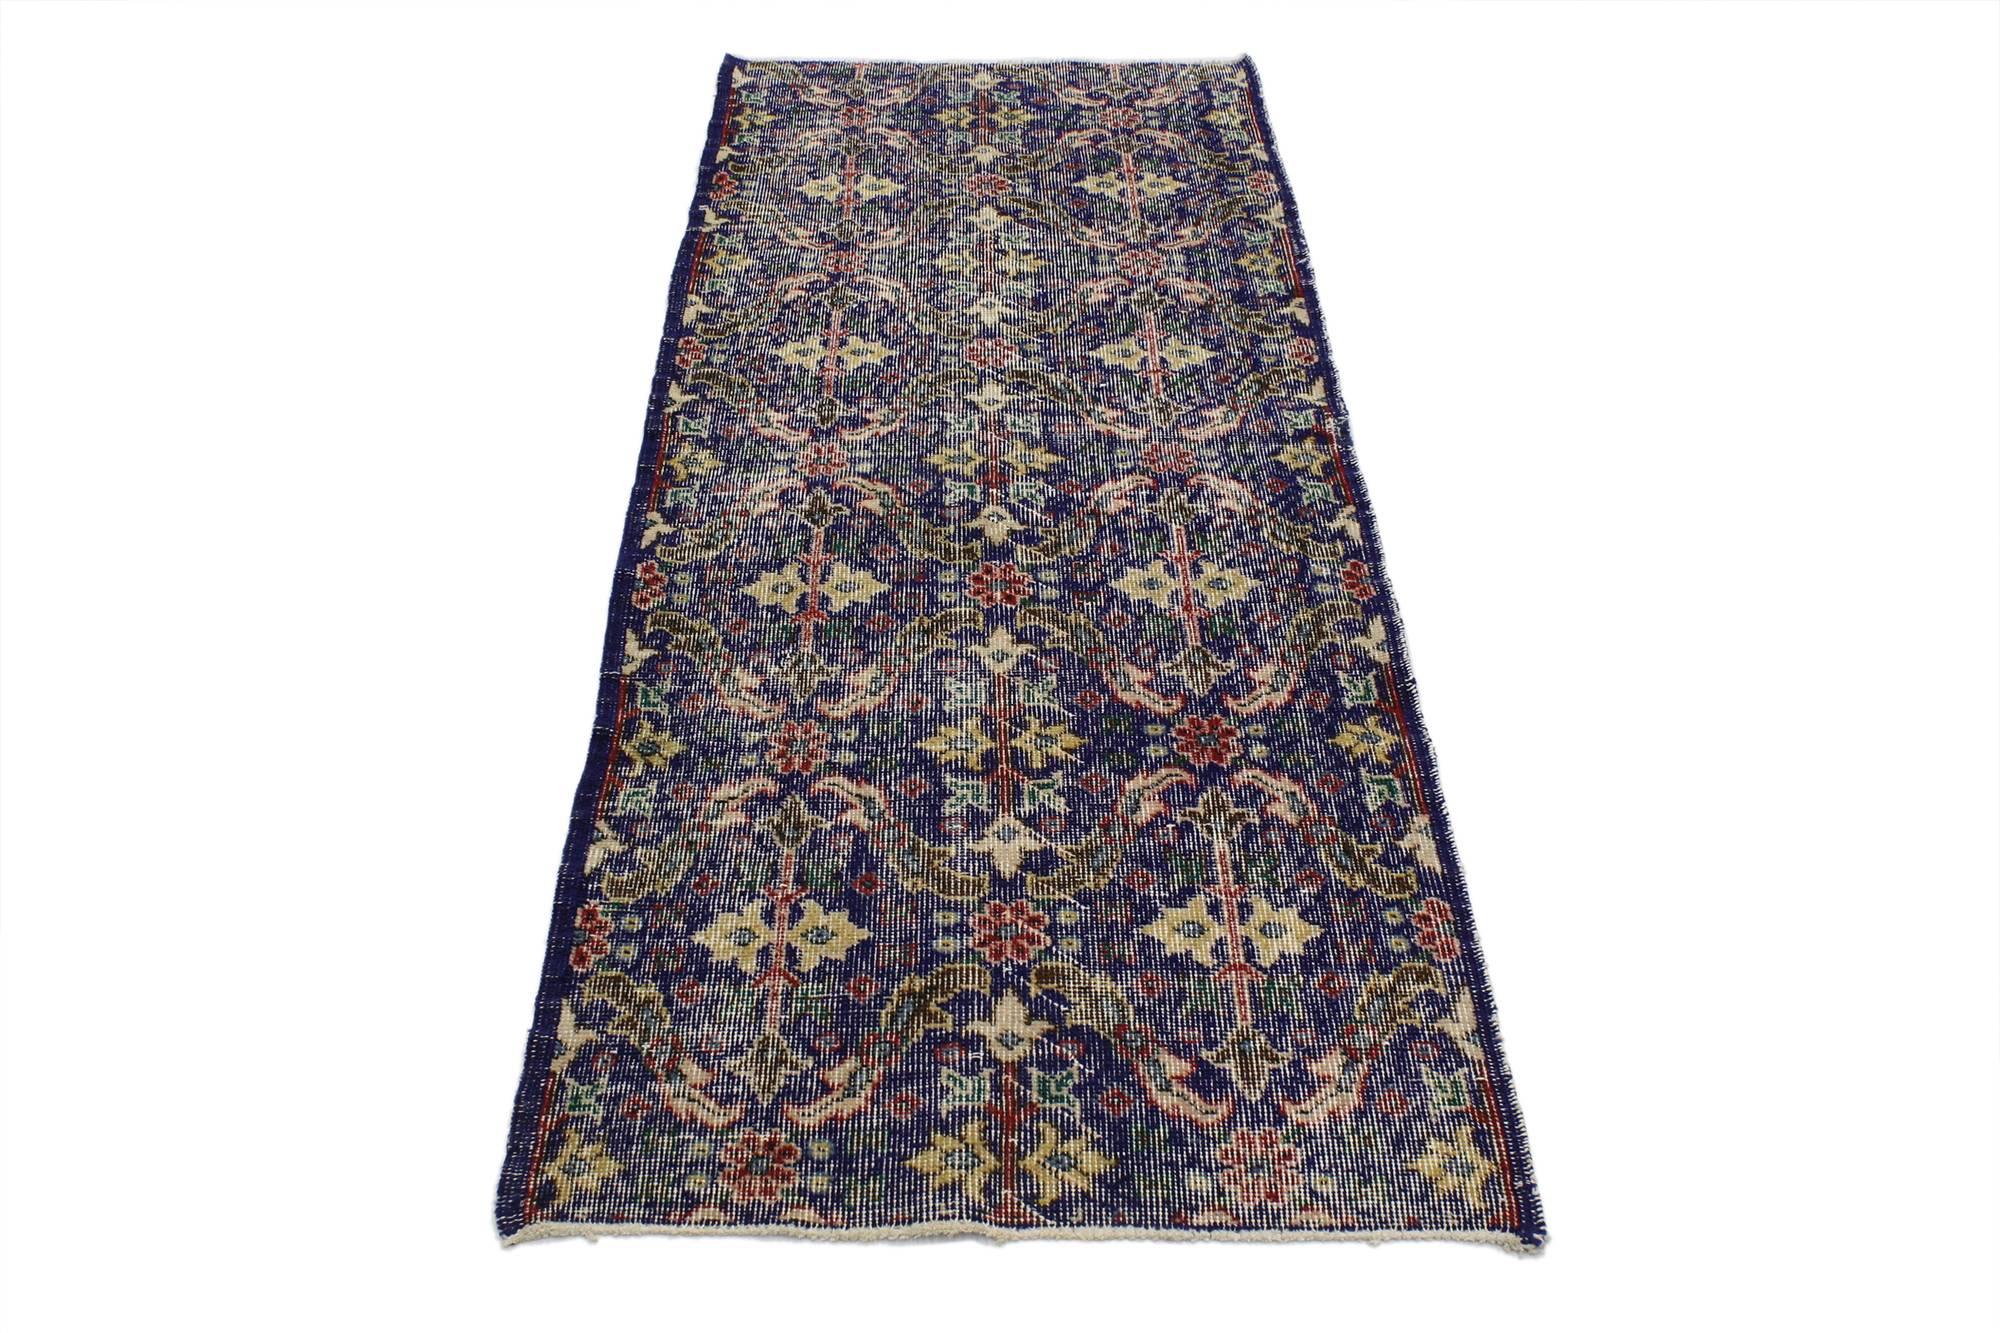 51926 distressed vintage Turkish Sivas rug with Modern Industrial Art Deco style. This hand knotted wool distressed vintage Turkish Sivas rug showcases a combination of Art Deco and Modern Industrial style. It features a diamond lattice and garden